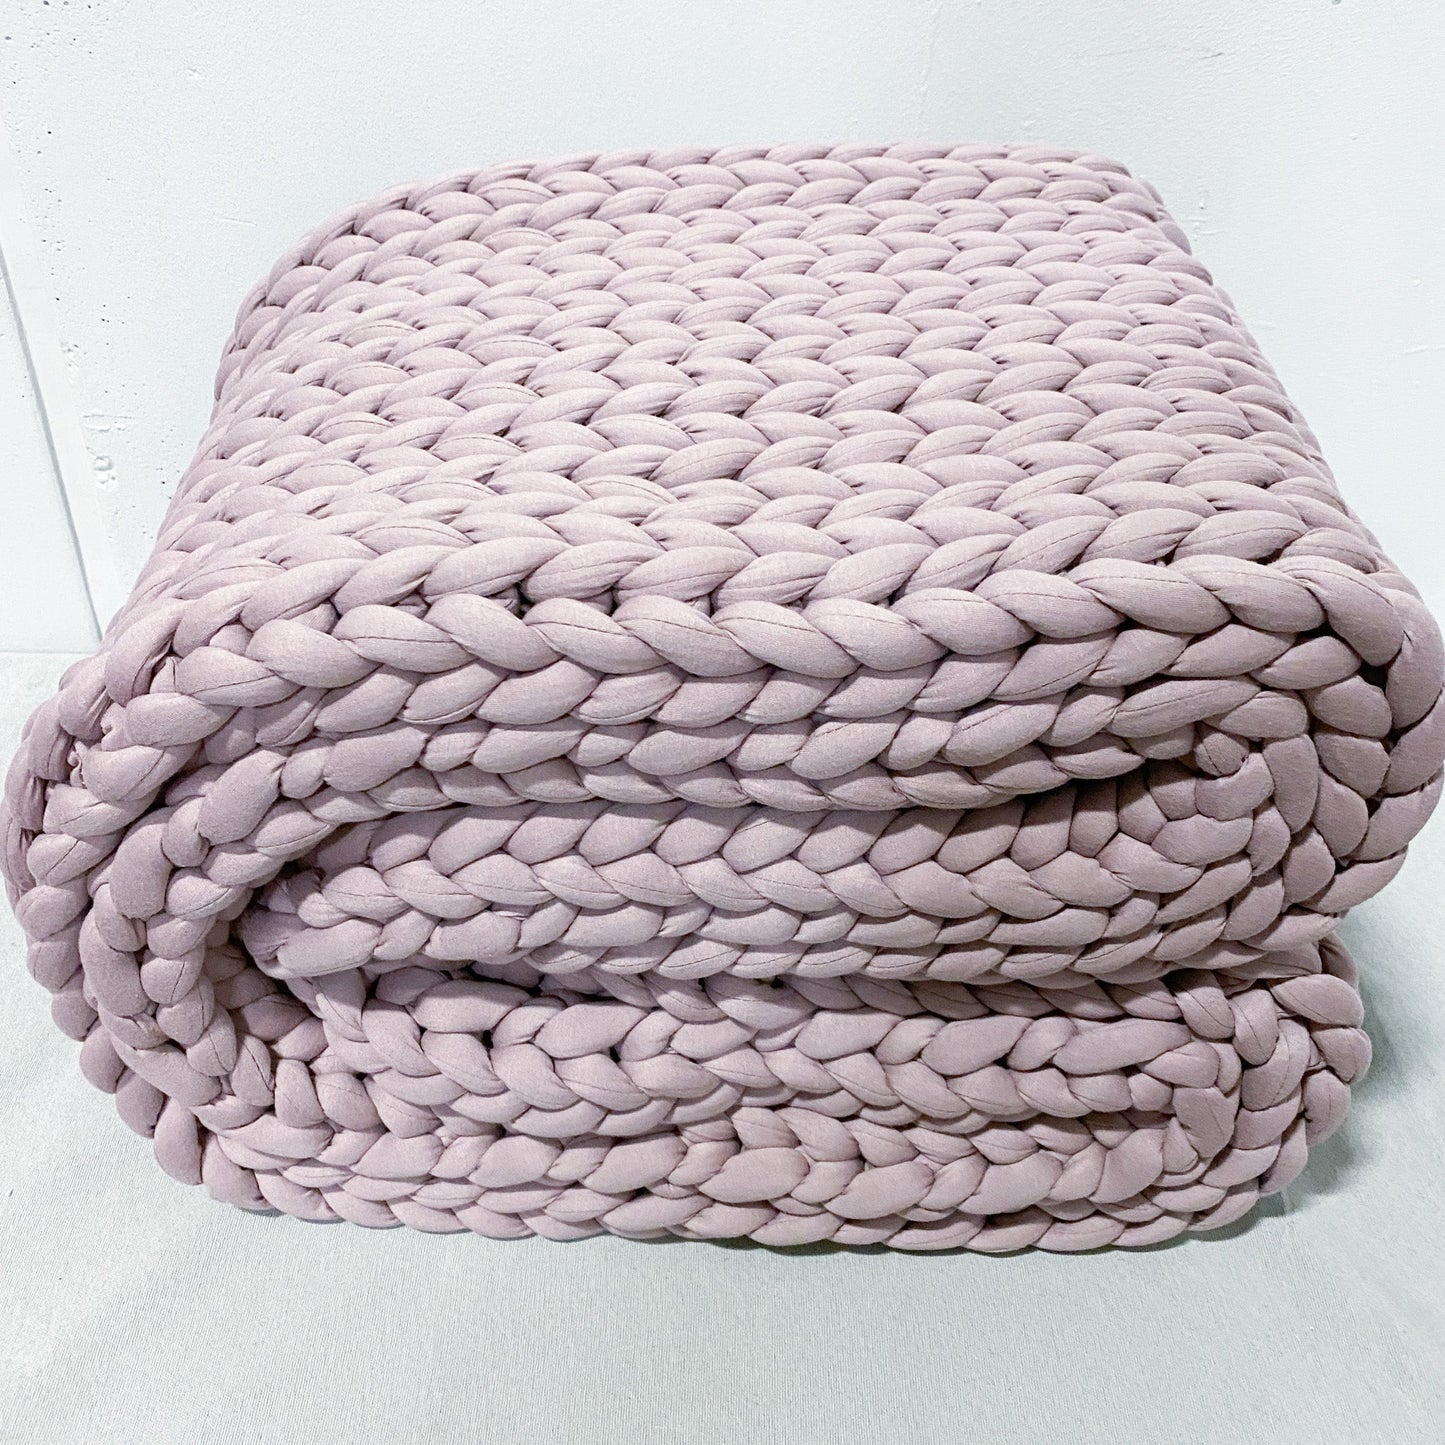 Knit Weighted Blanket (12lbs)